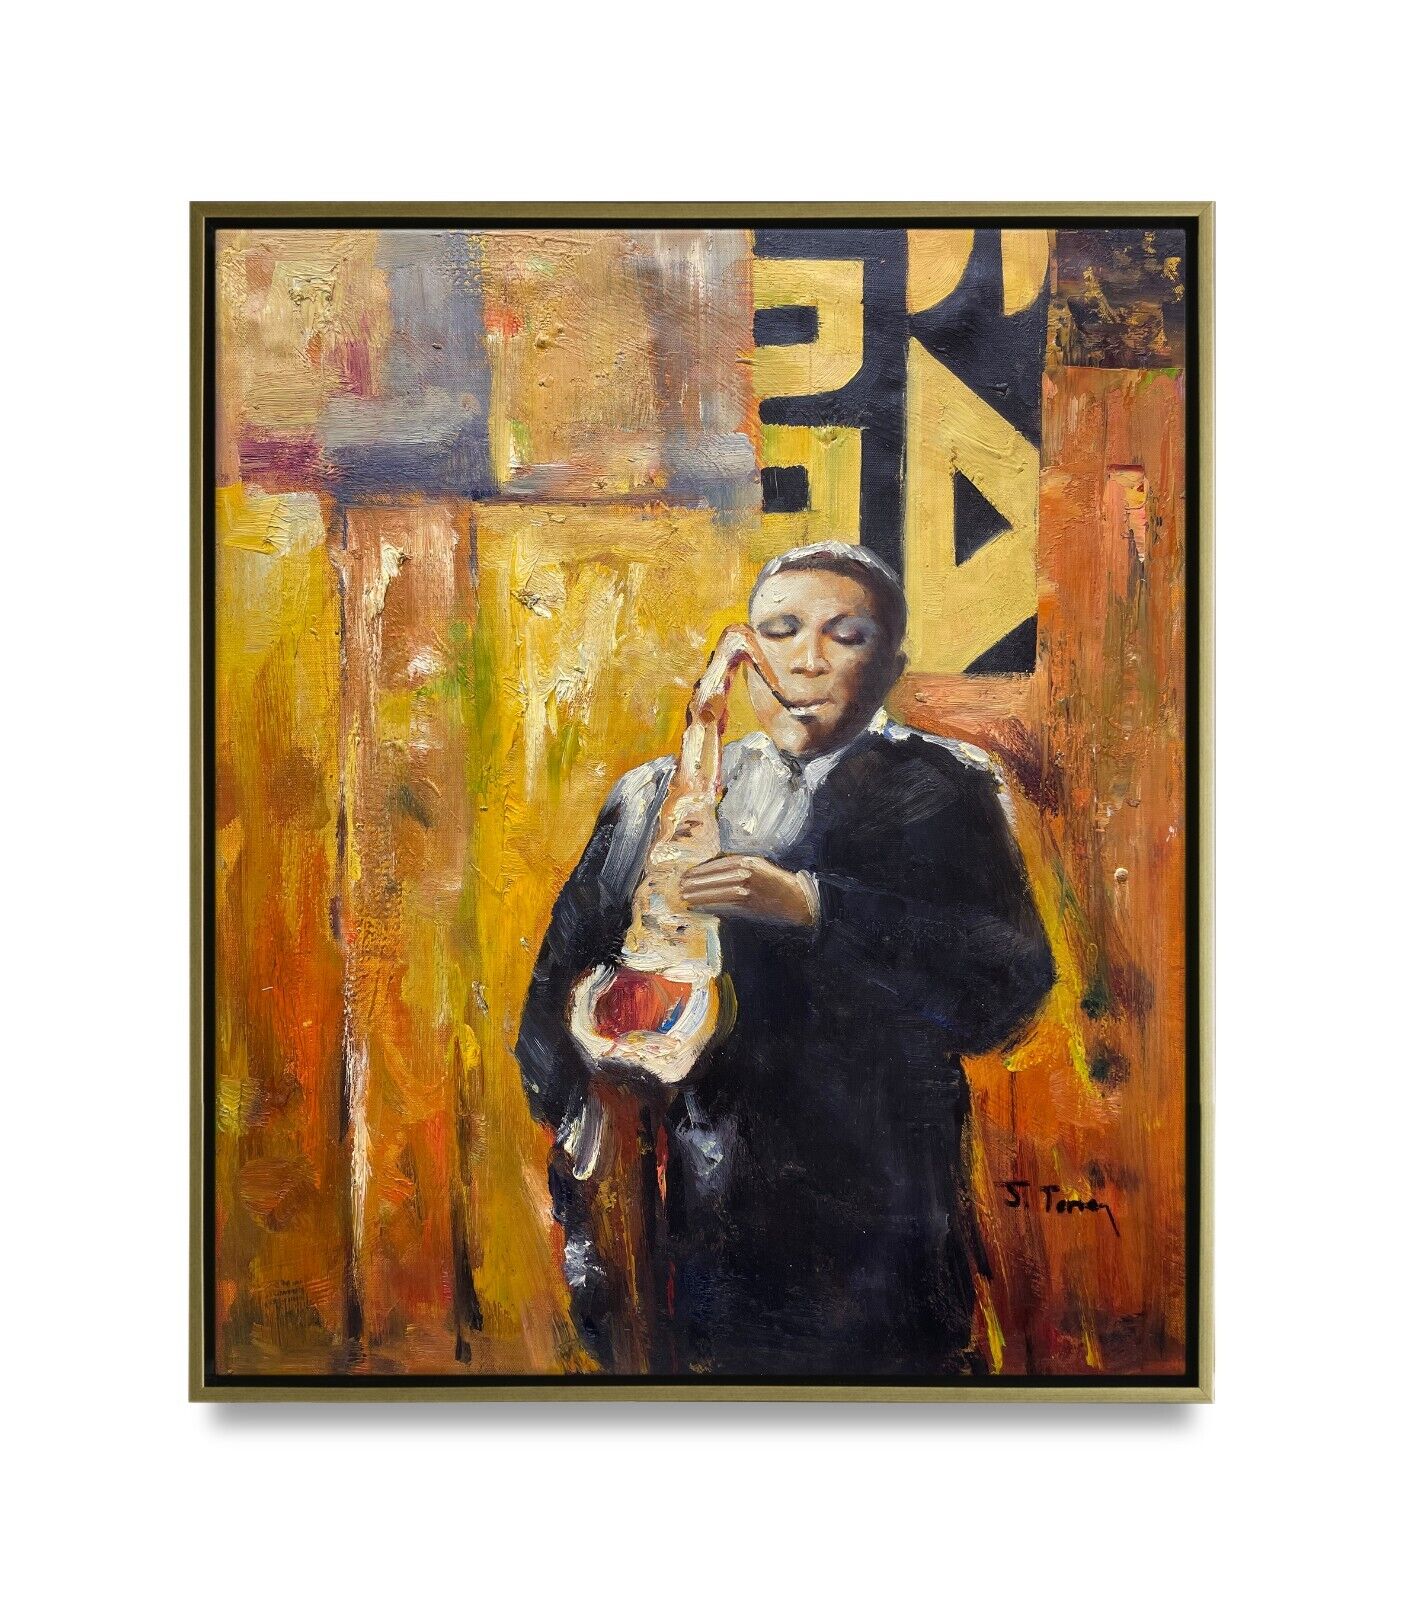 NY Art-Original Oil Painting of a Musician on Canvas 20x24 Framed